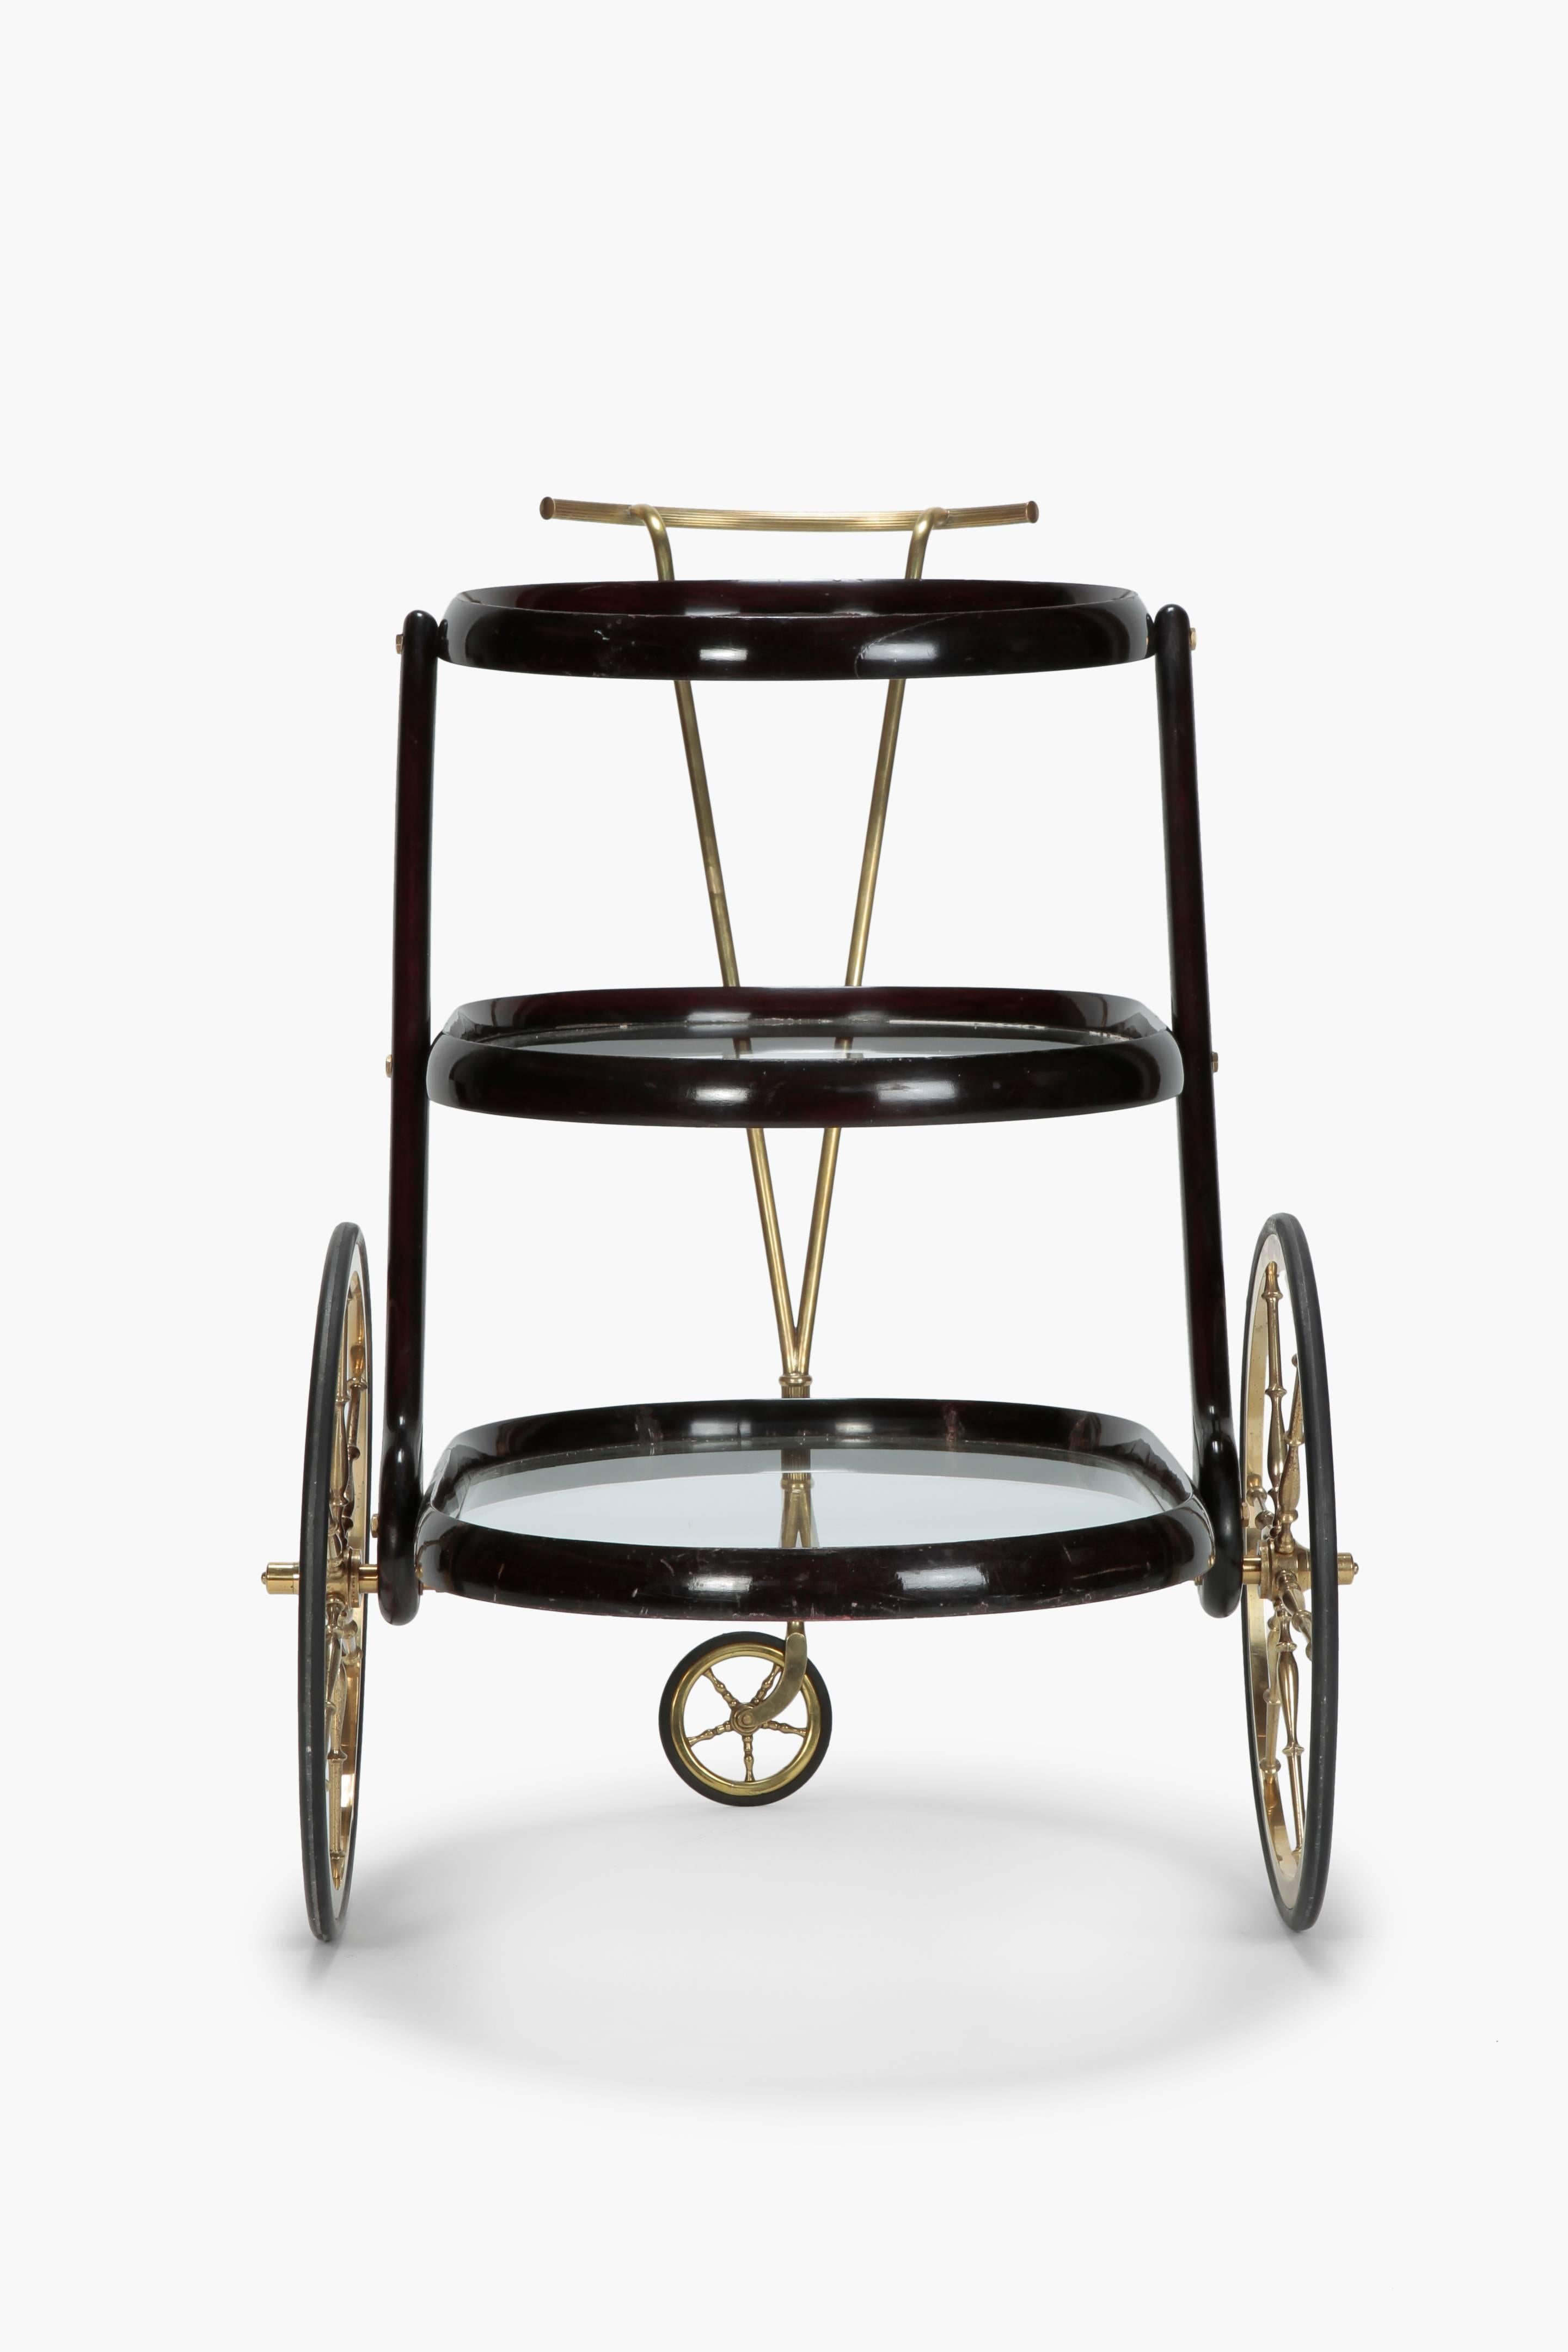 Cesare Lacca mahogany bar cart manufactured in Italy in the 1950s. Extraordinary nice work. Three shelves with glass trays, all metal parts made of solid brass. All parts original. Very elegant object.